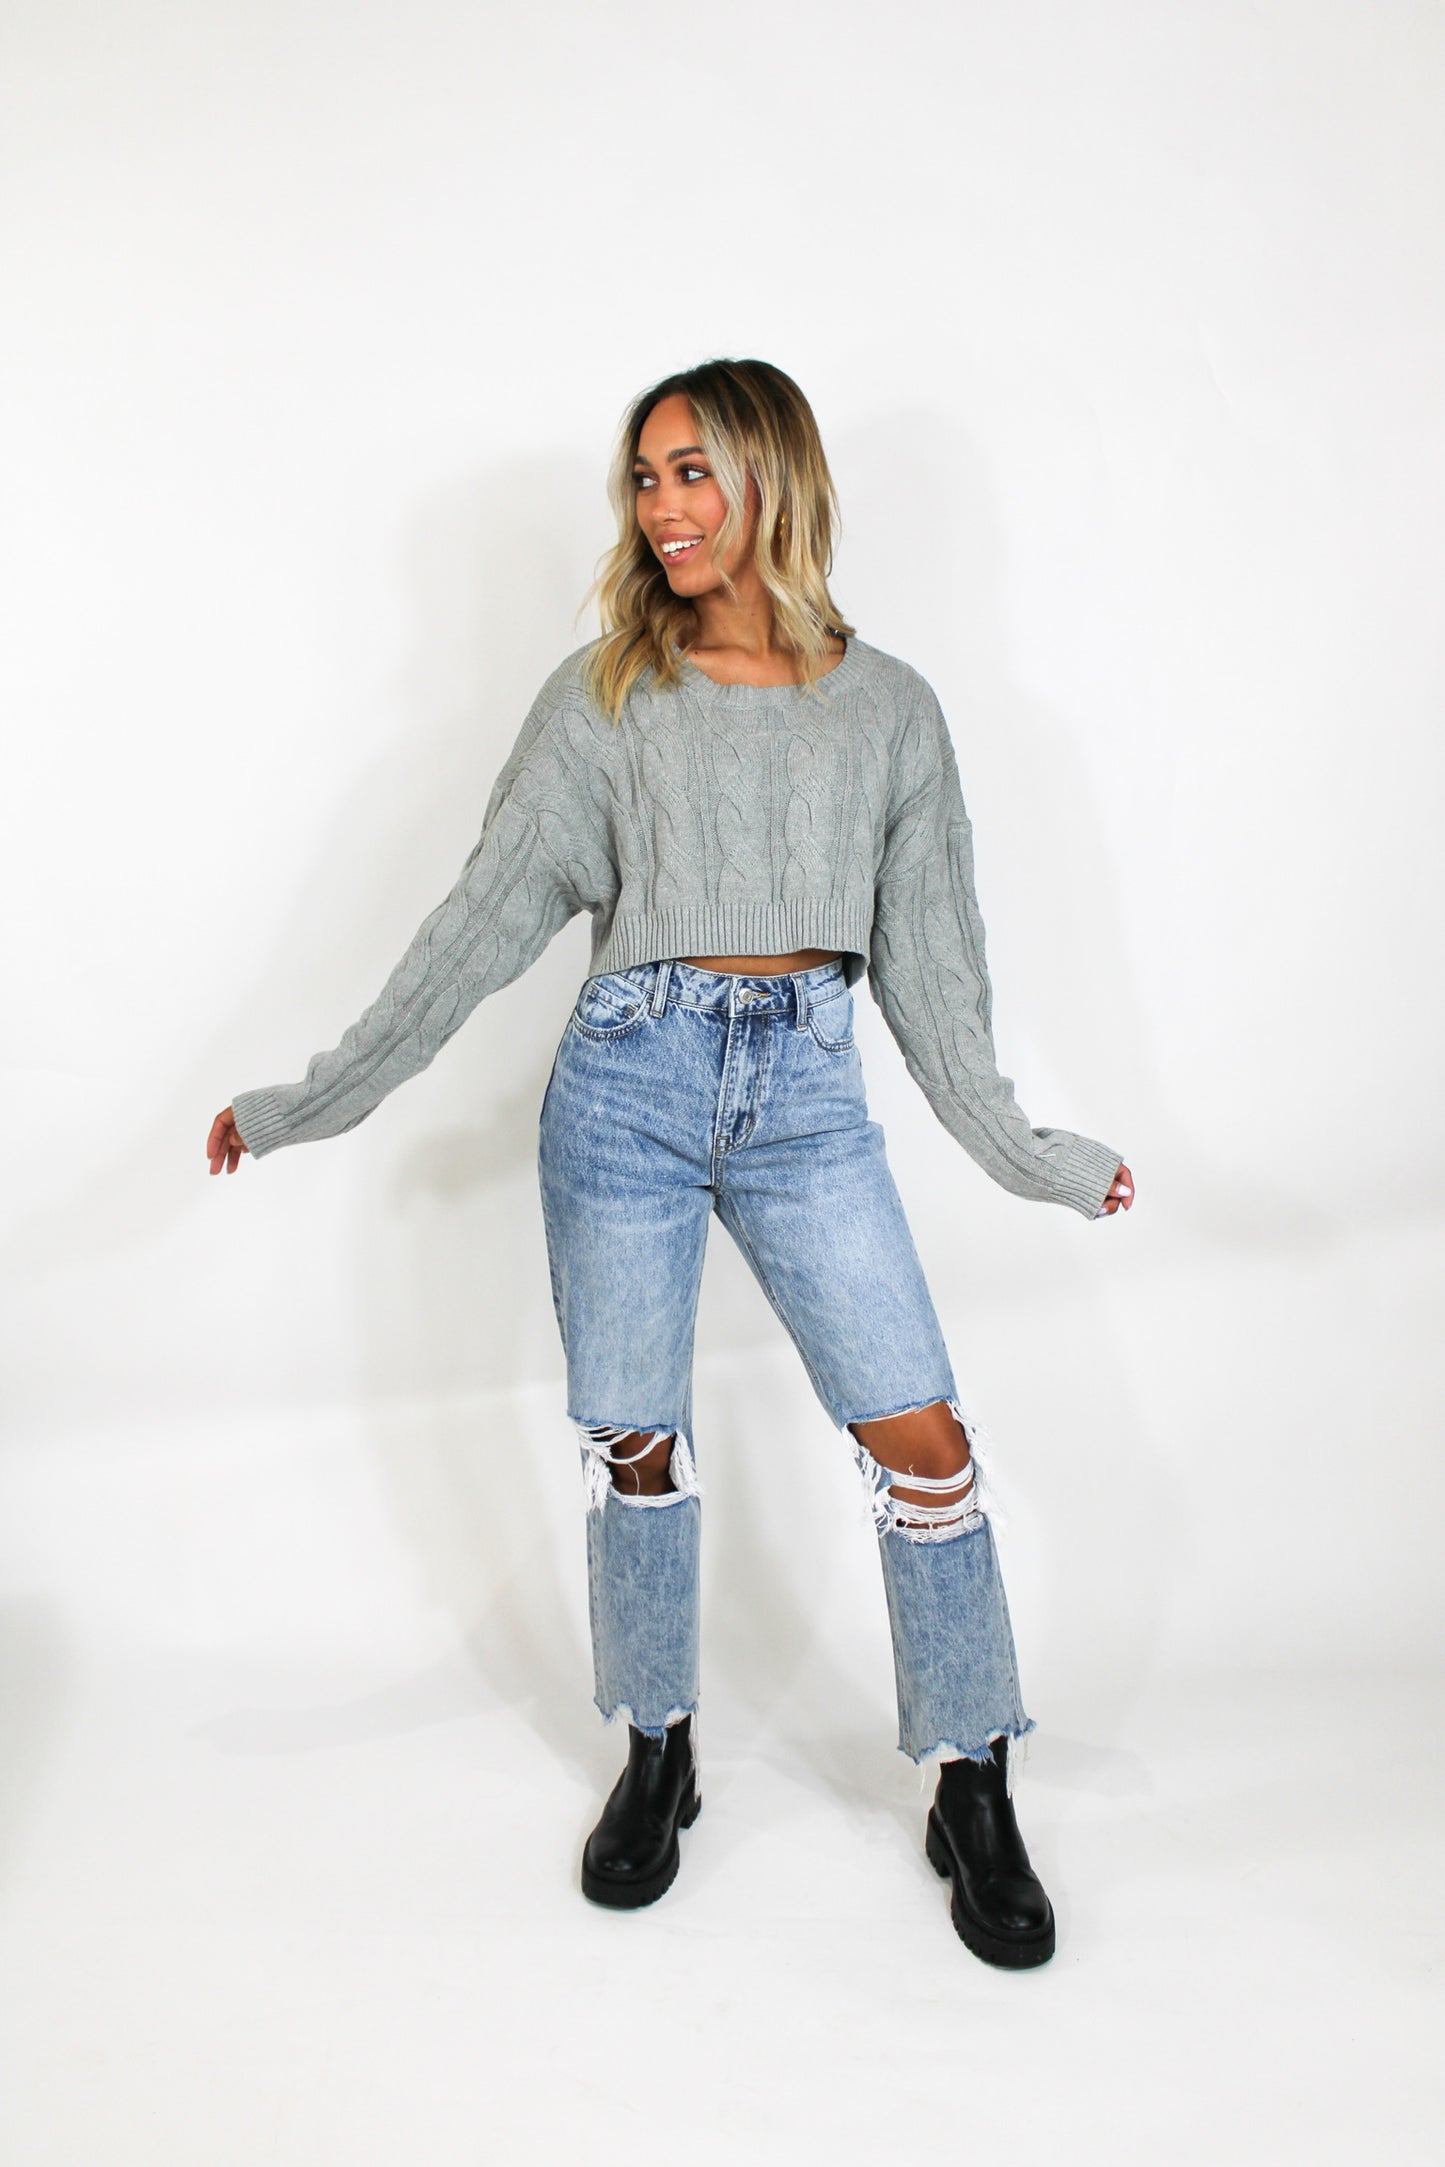 Meet Me At The Subway Cropped Sweater